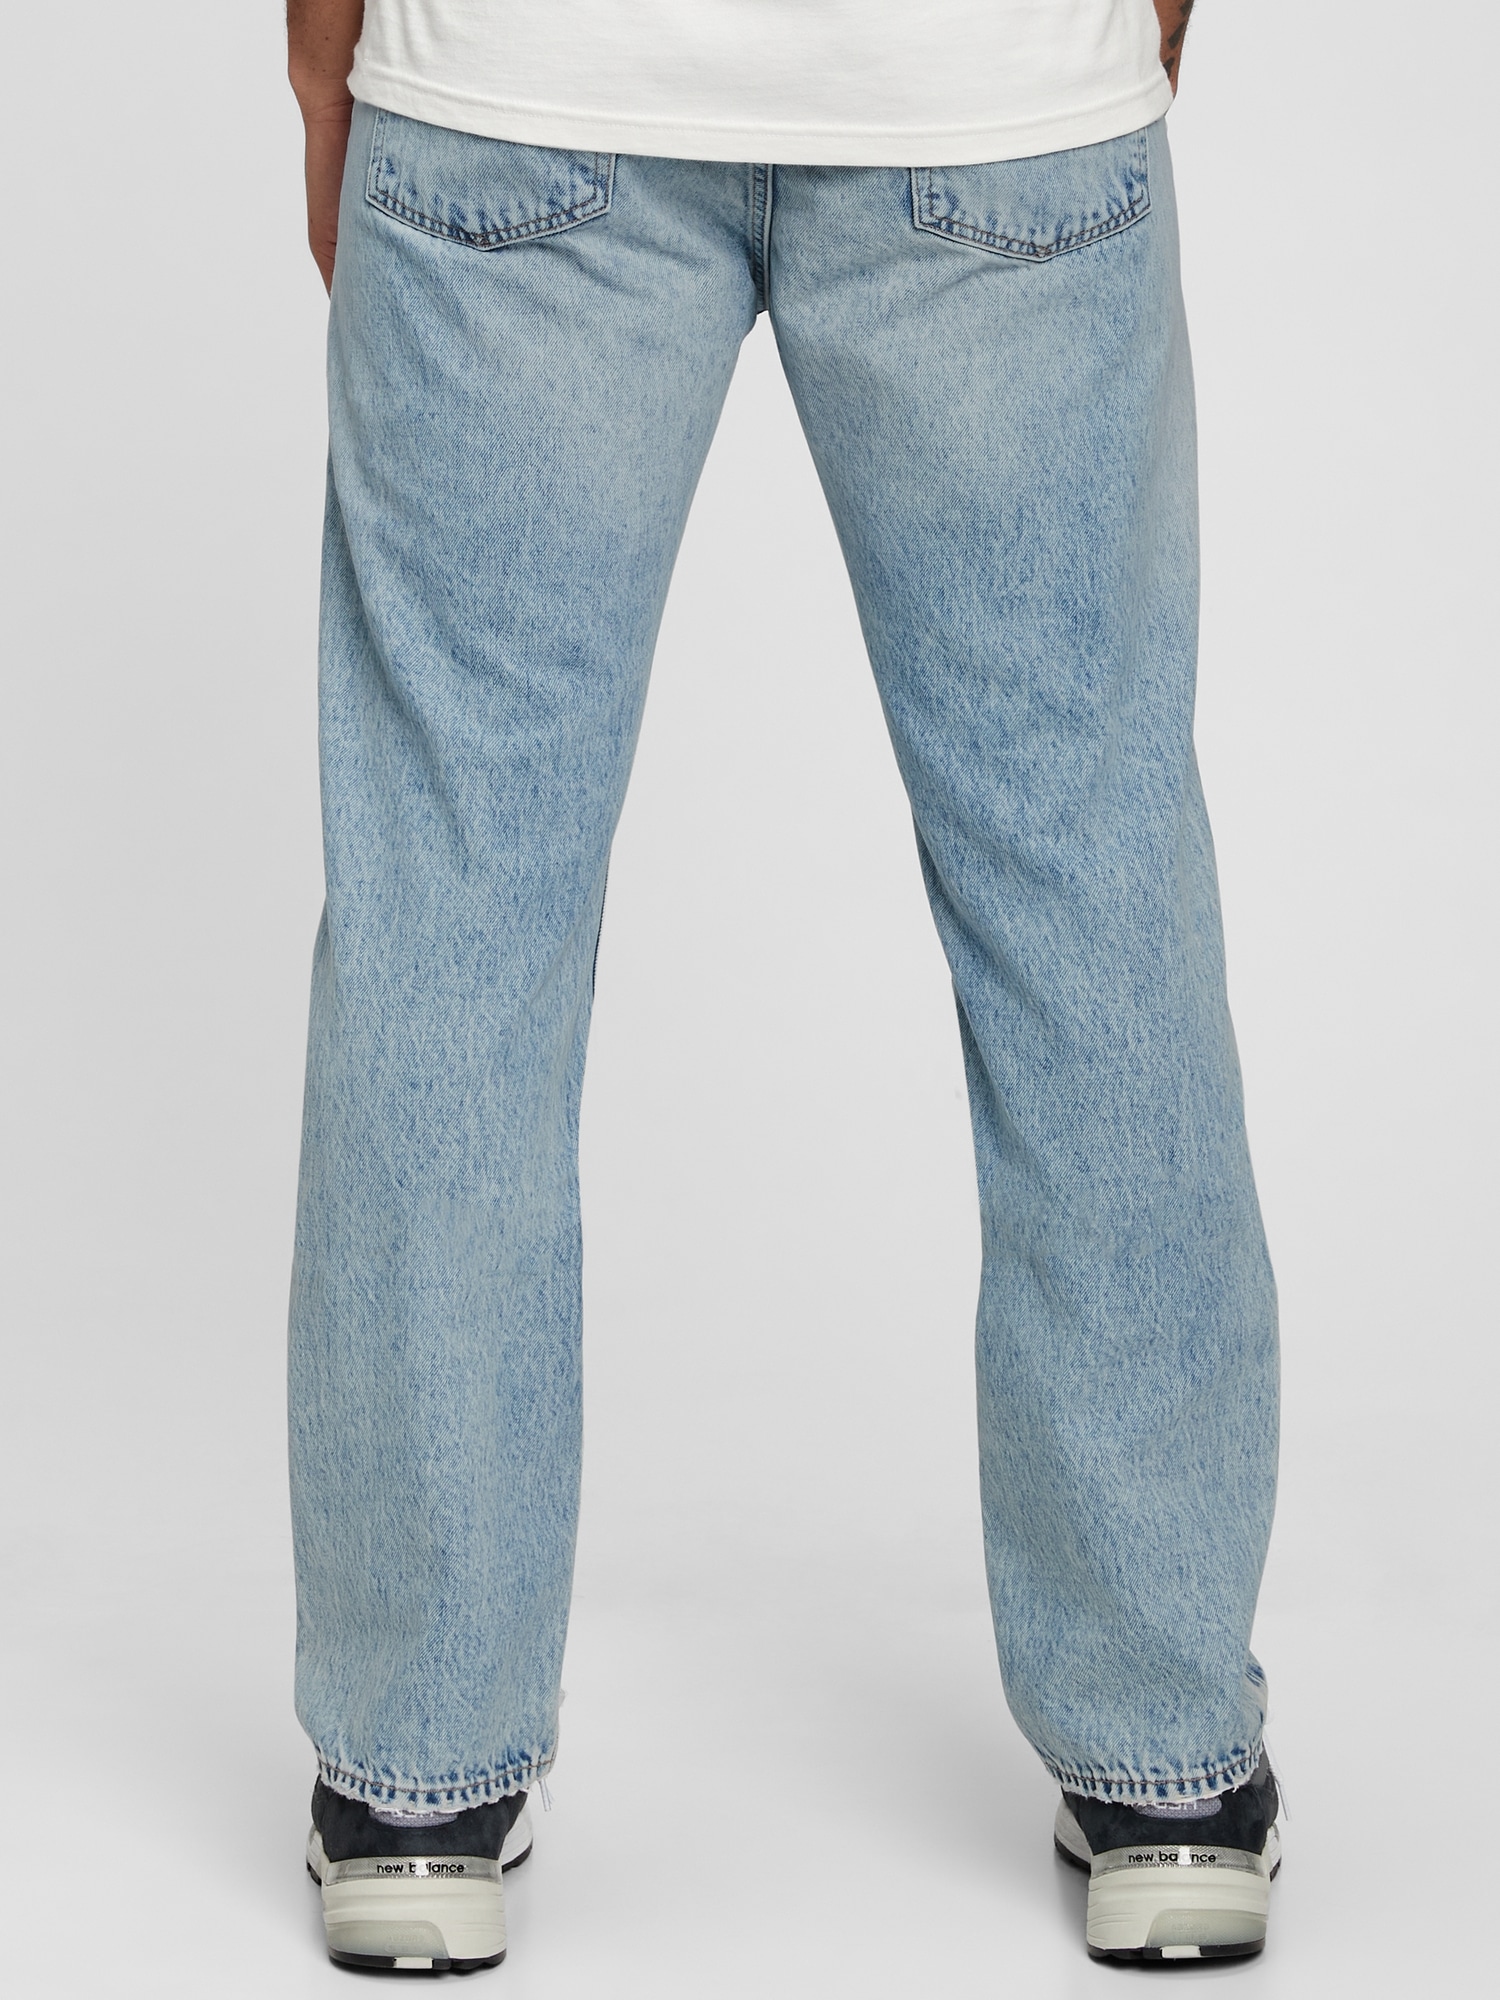 '90s Original Straight Fit Jeans with Washwell | Gap